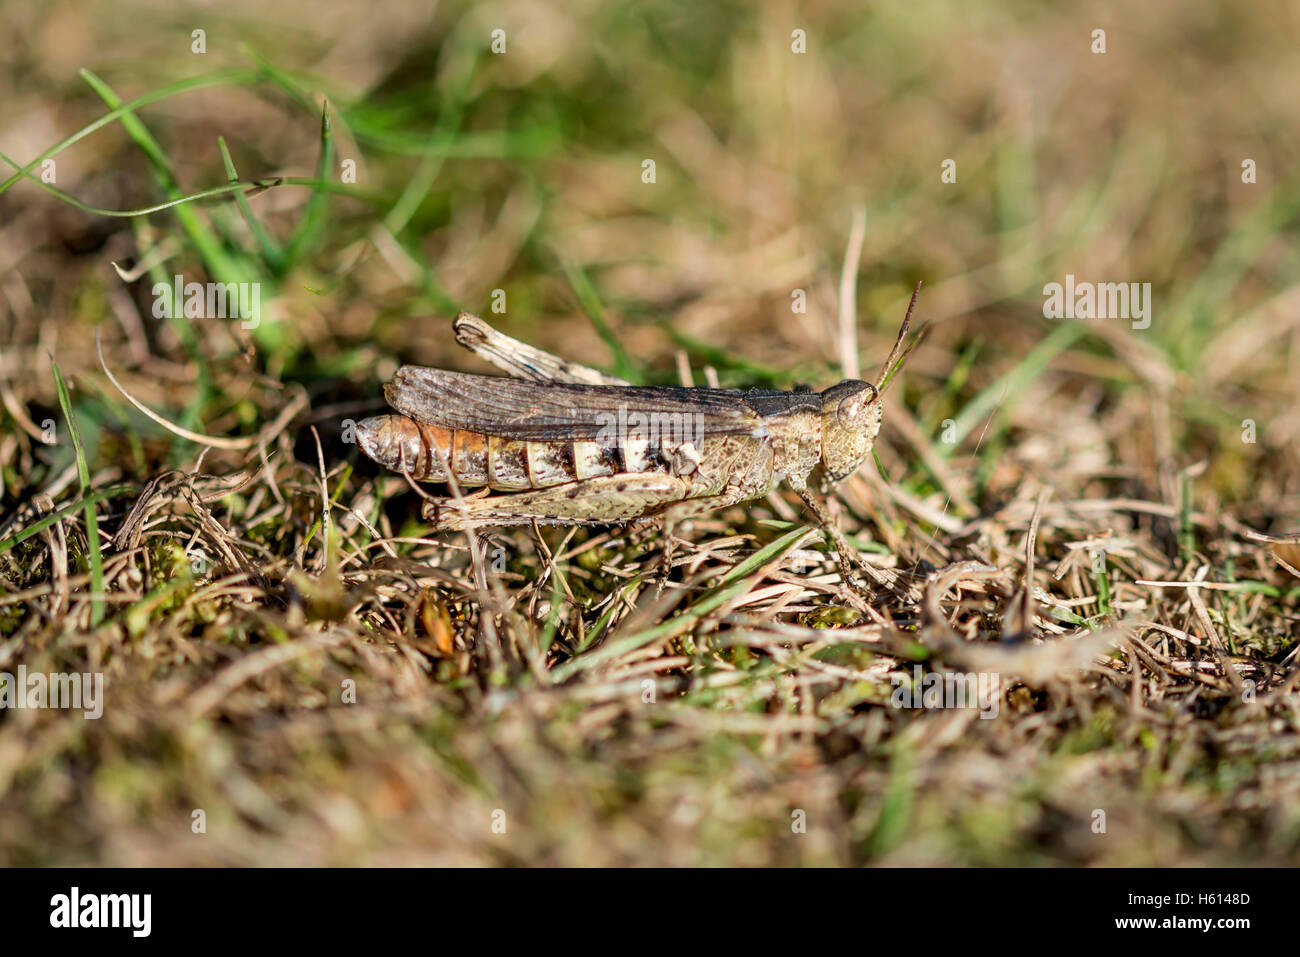 Field Grasshopper perfectly camouflaged in some dry grass Stock Photo